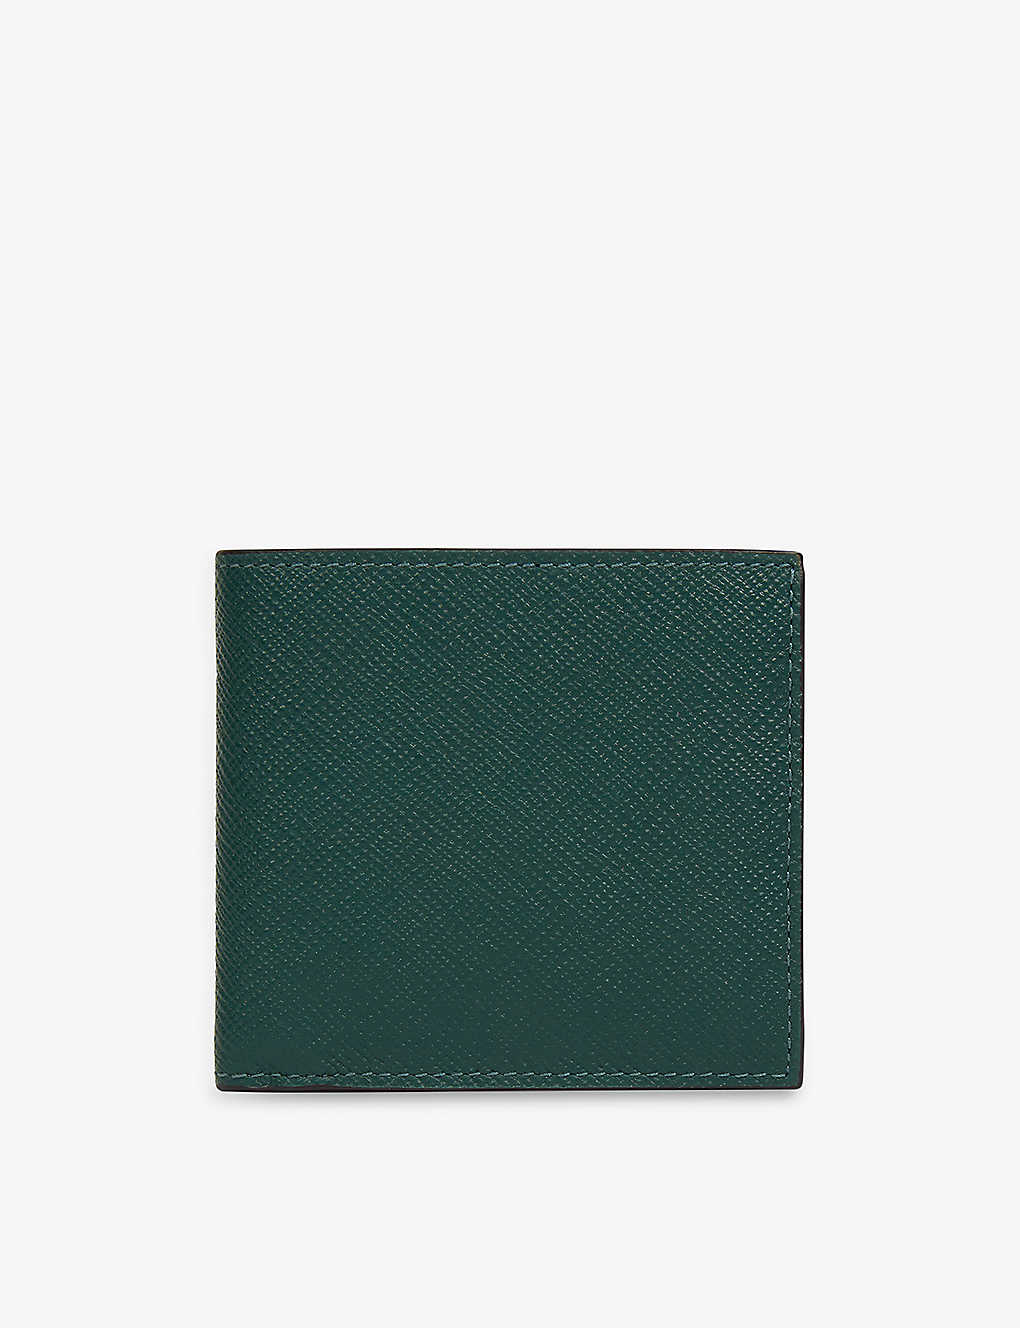 Smythson Green Panama Grained Leather Wallet